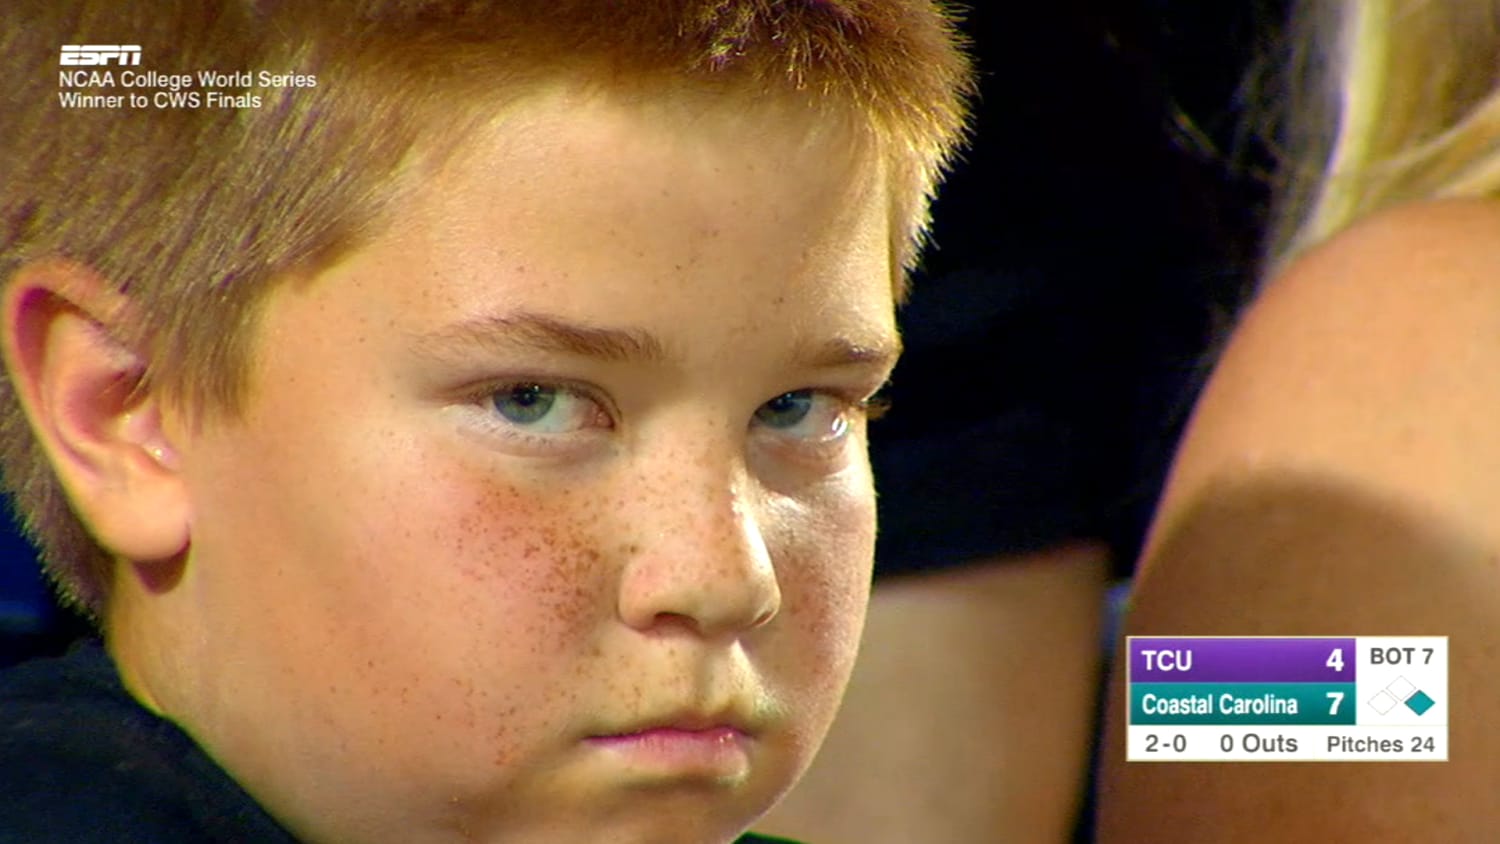 kid-s-epic-death-stare-steals-the-show-at-baseball-game-today